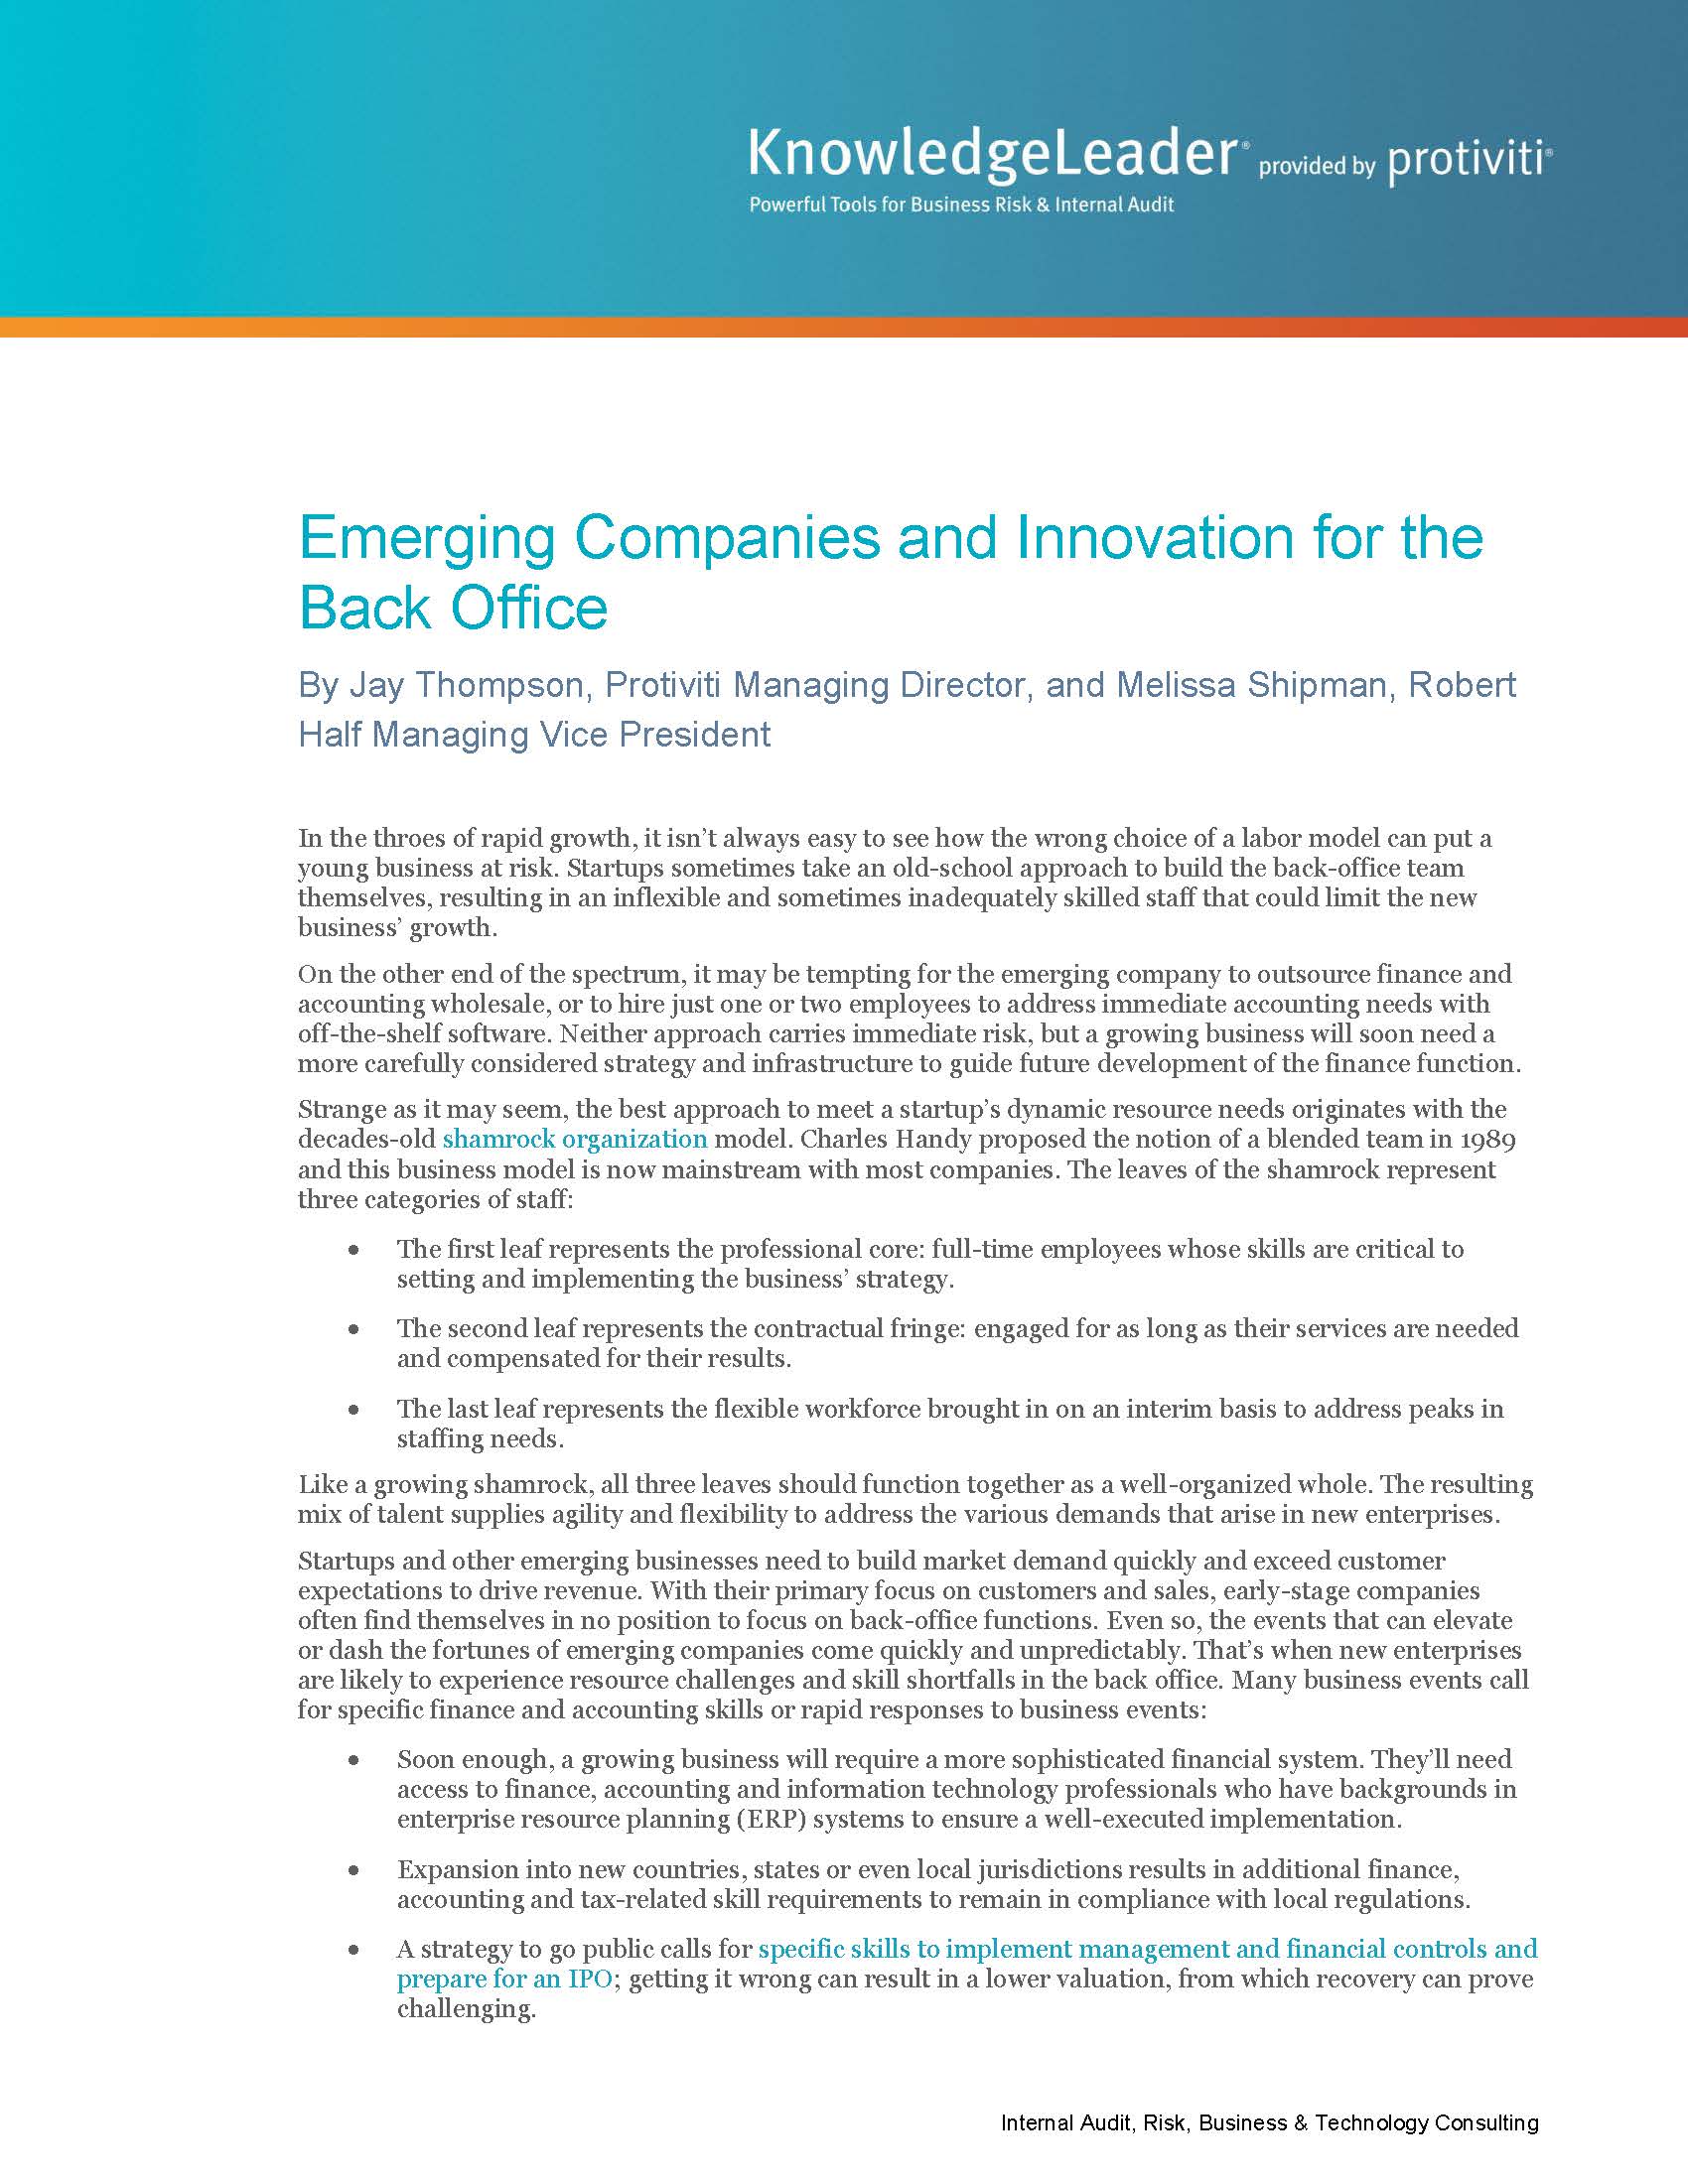 Screenshot of the first page of Emerging Companies and Innovation for the Back Office